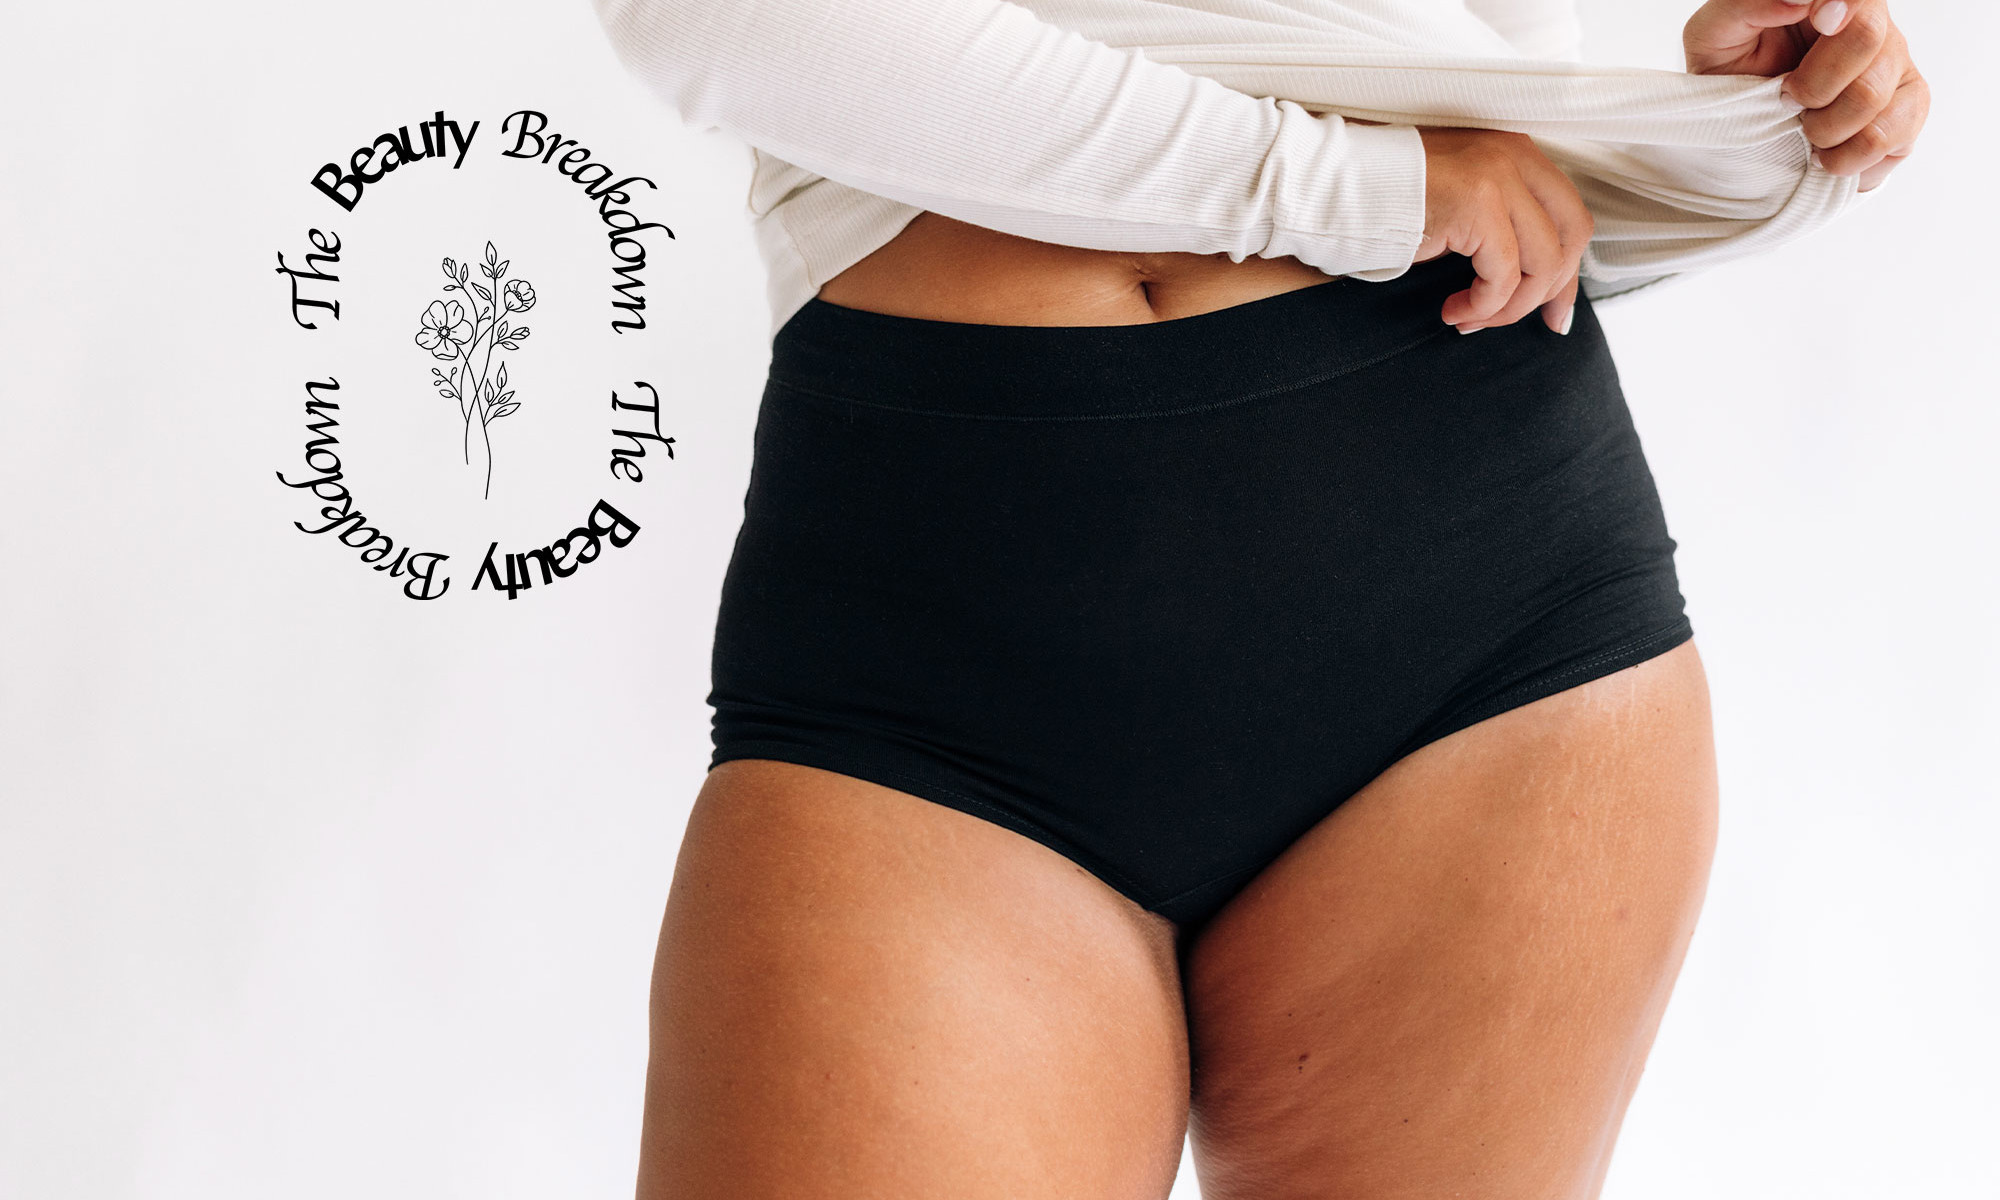 Limit Your Risk Of UTIs & Yeast Infections By Doing This